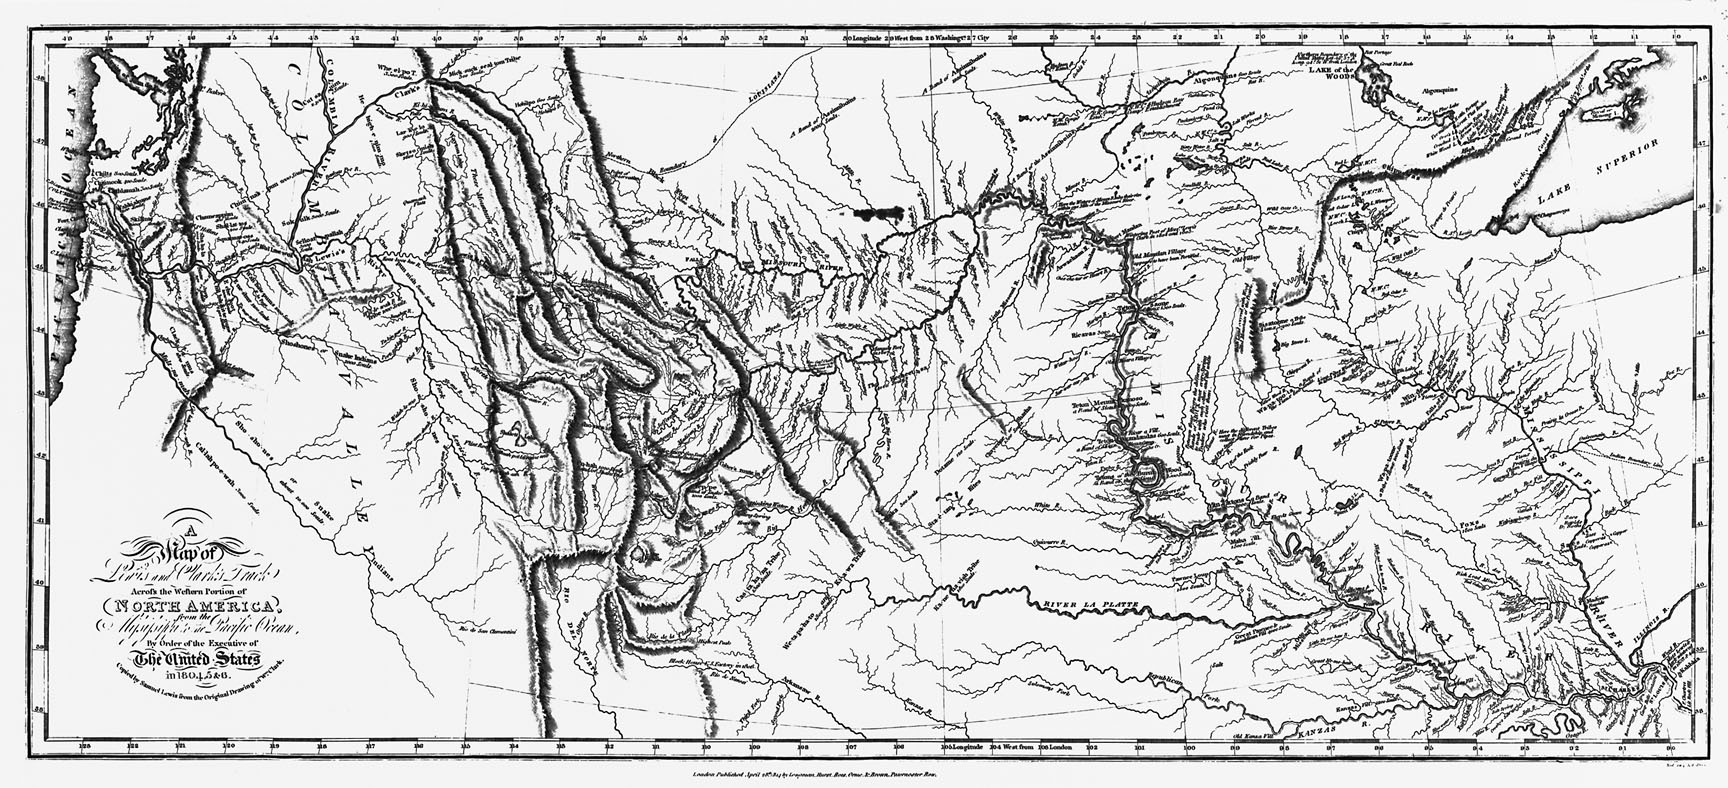  Preview of previous document: 2. Map of Lewis and Clark's Track